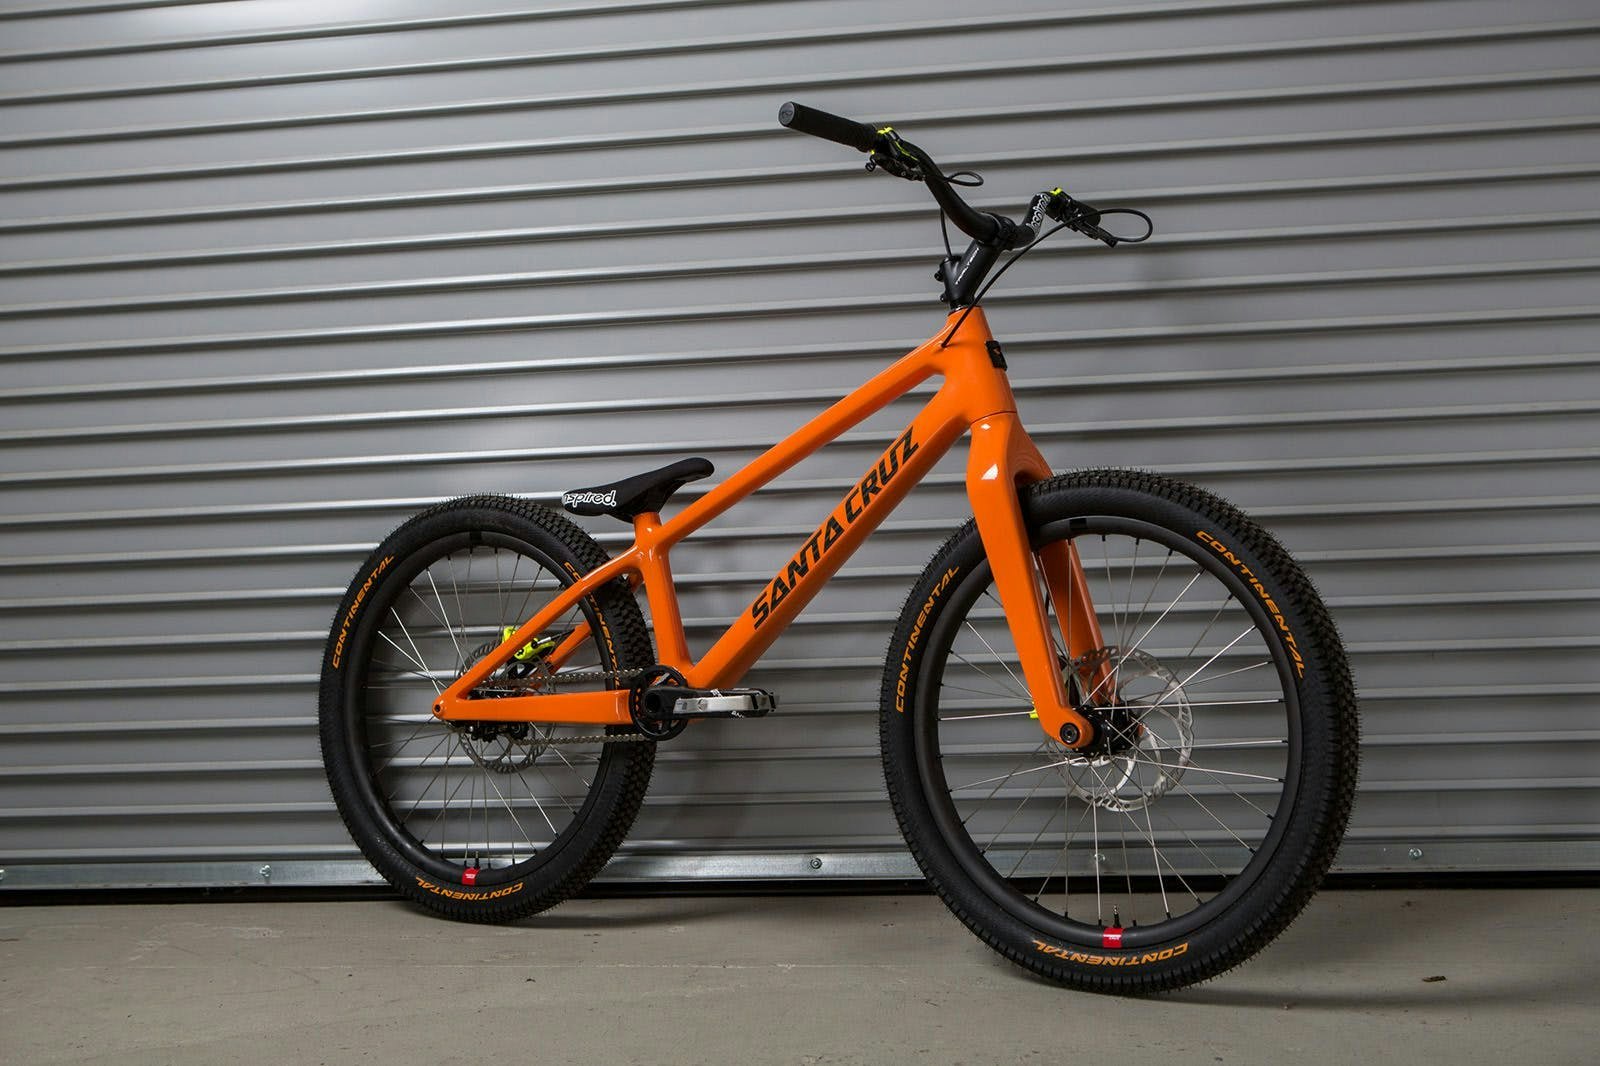 Danny Macaskill trails bike complete in orange with 24" Reserve carbon wheels in front of a Santa Cruz Bicycles factory roll up door